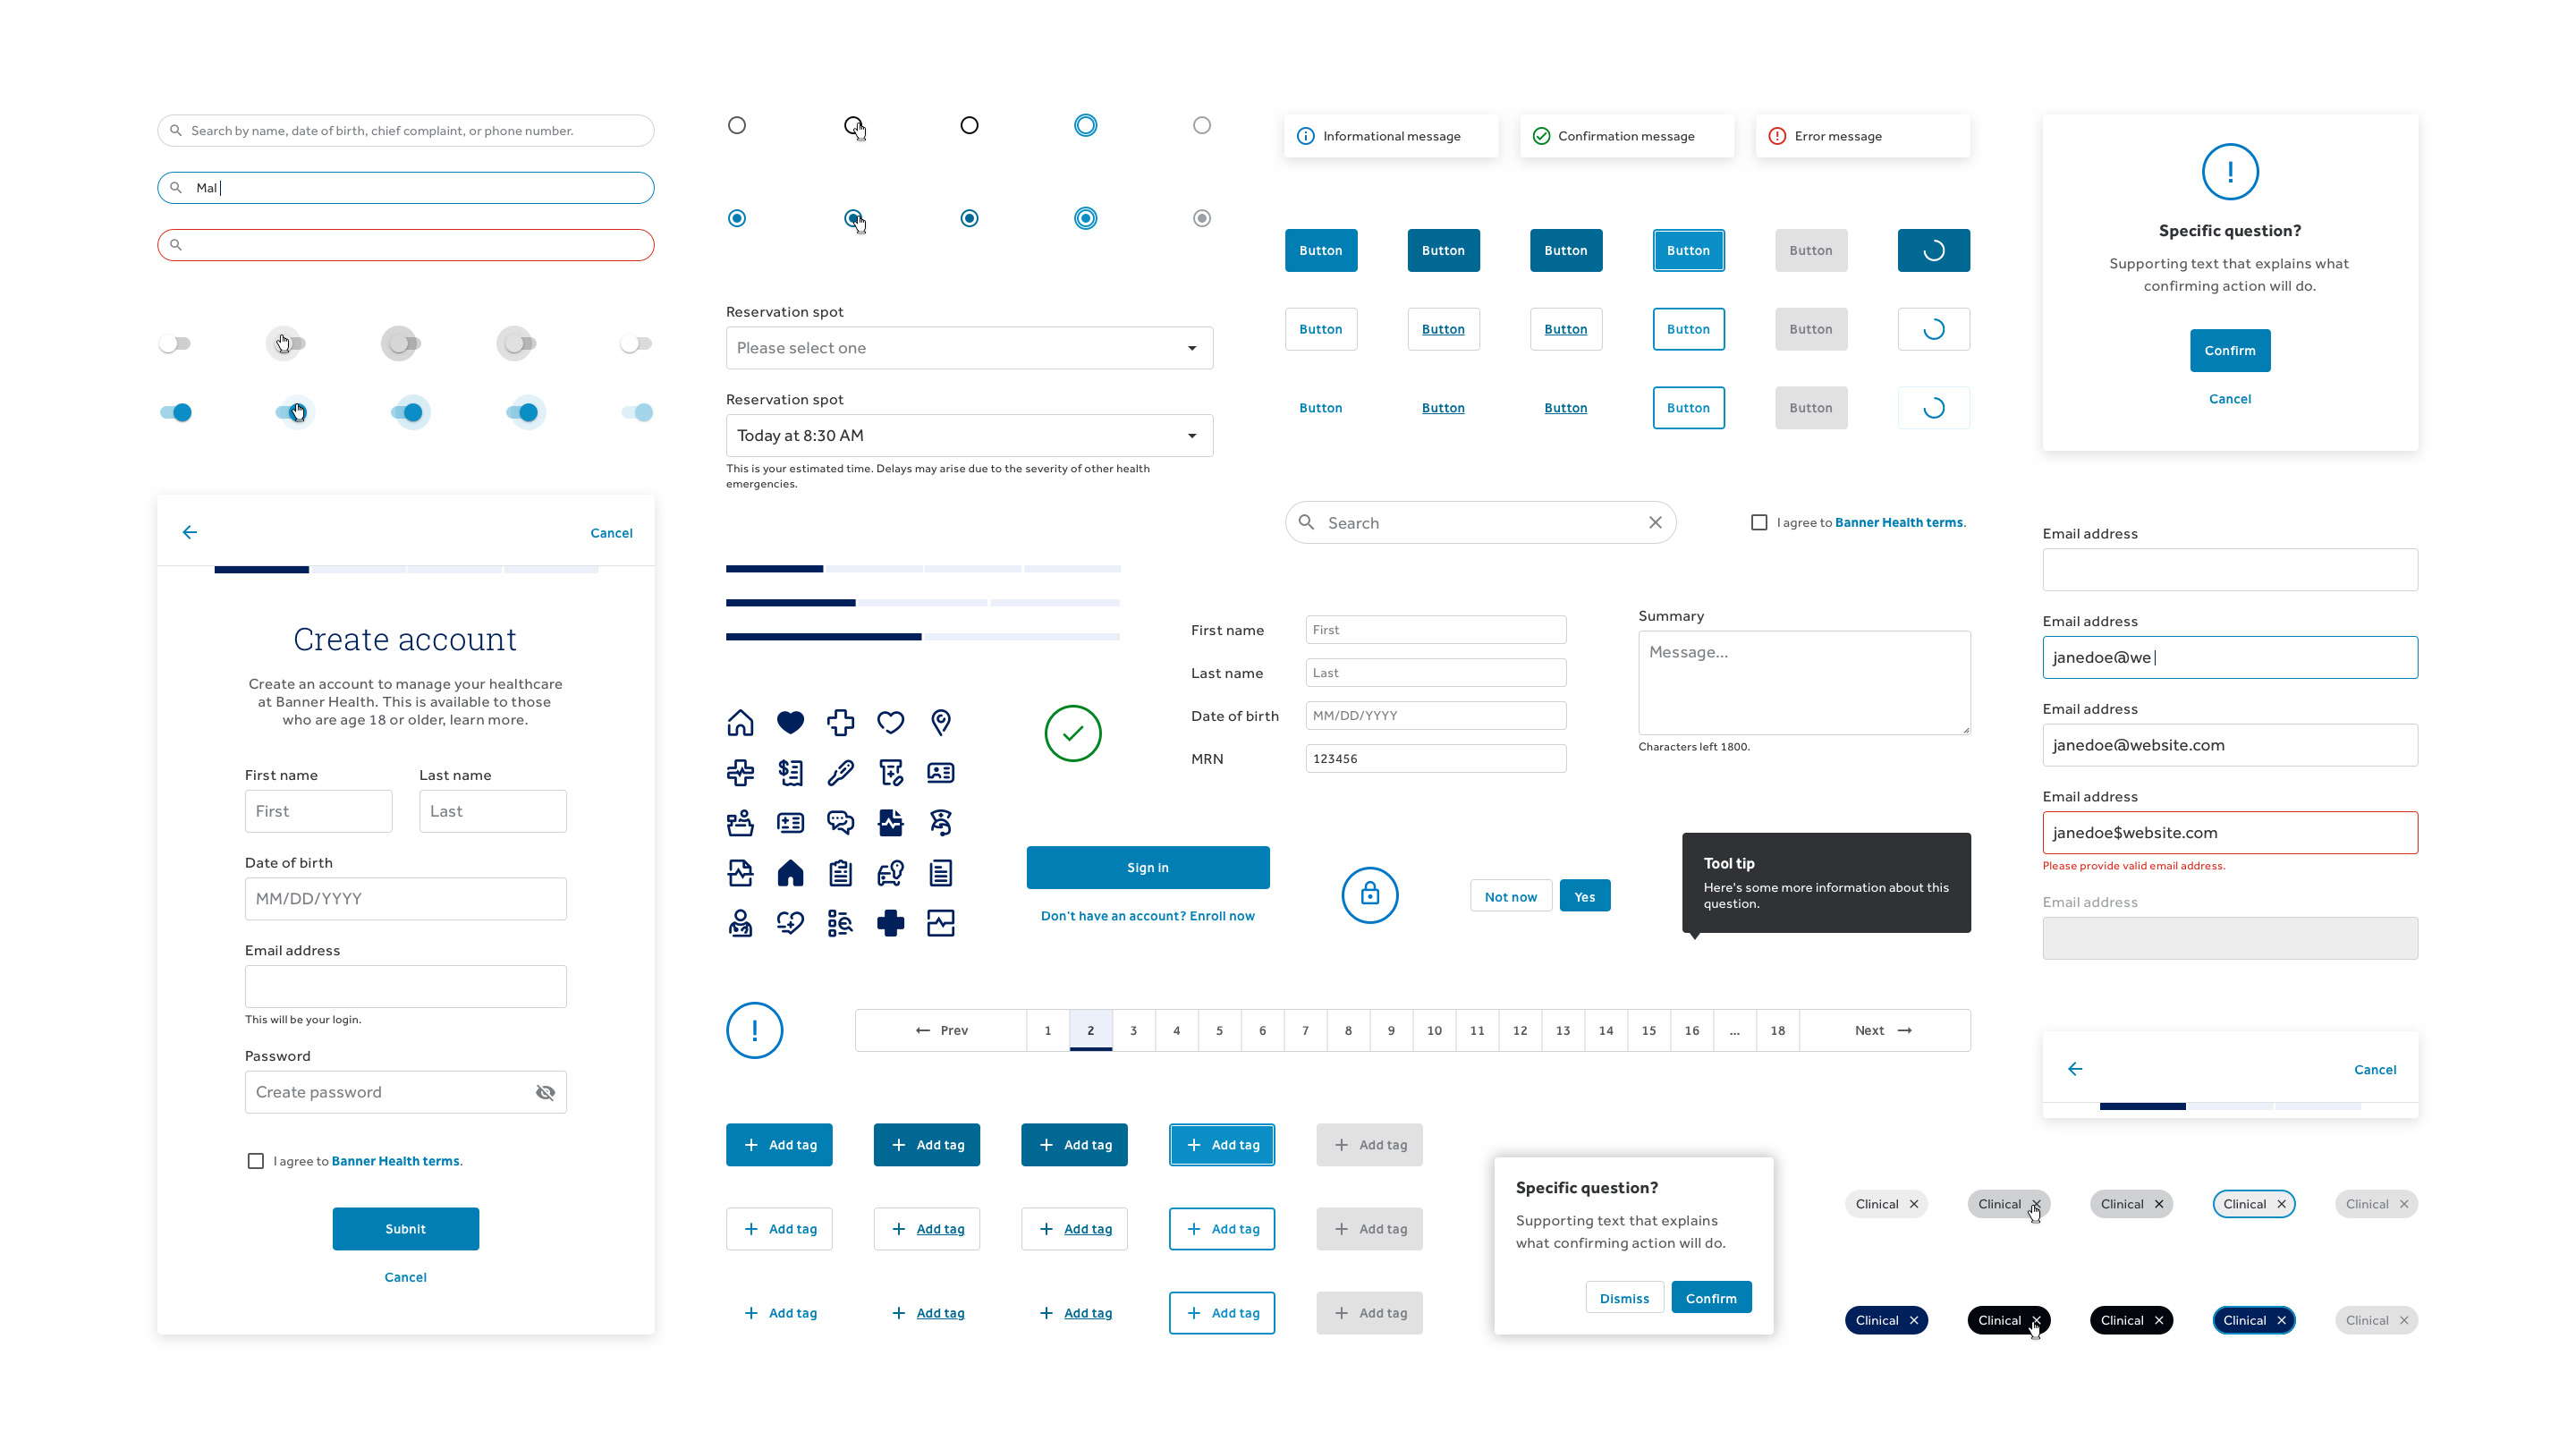 A screenshot of some components in the design system